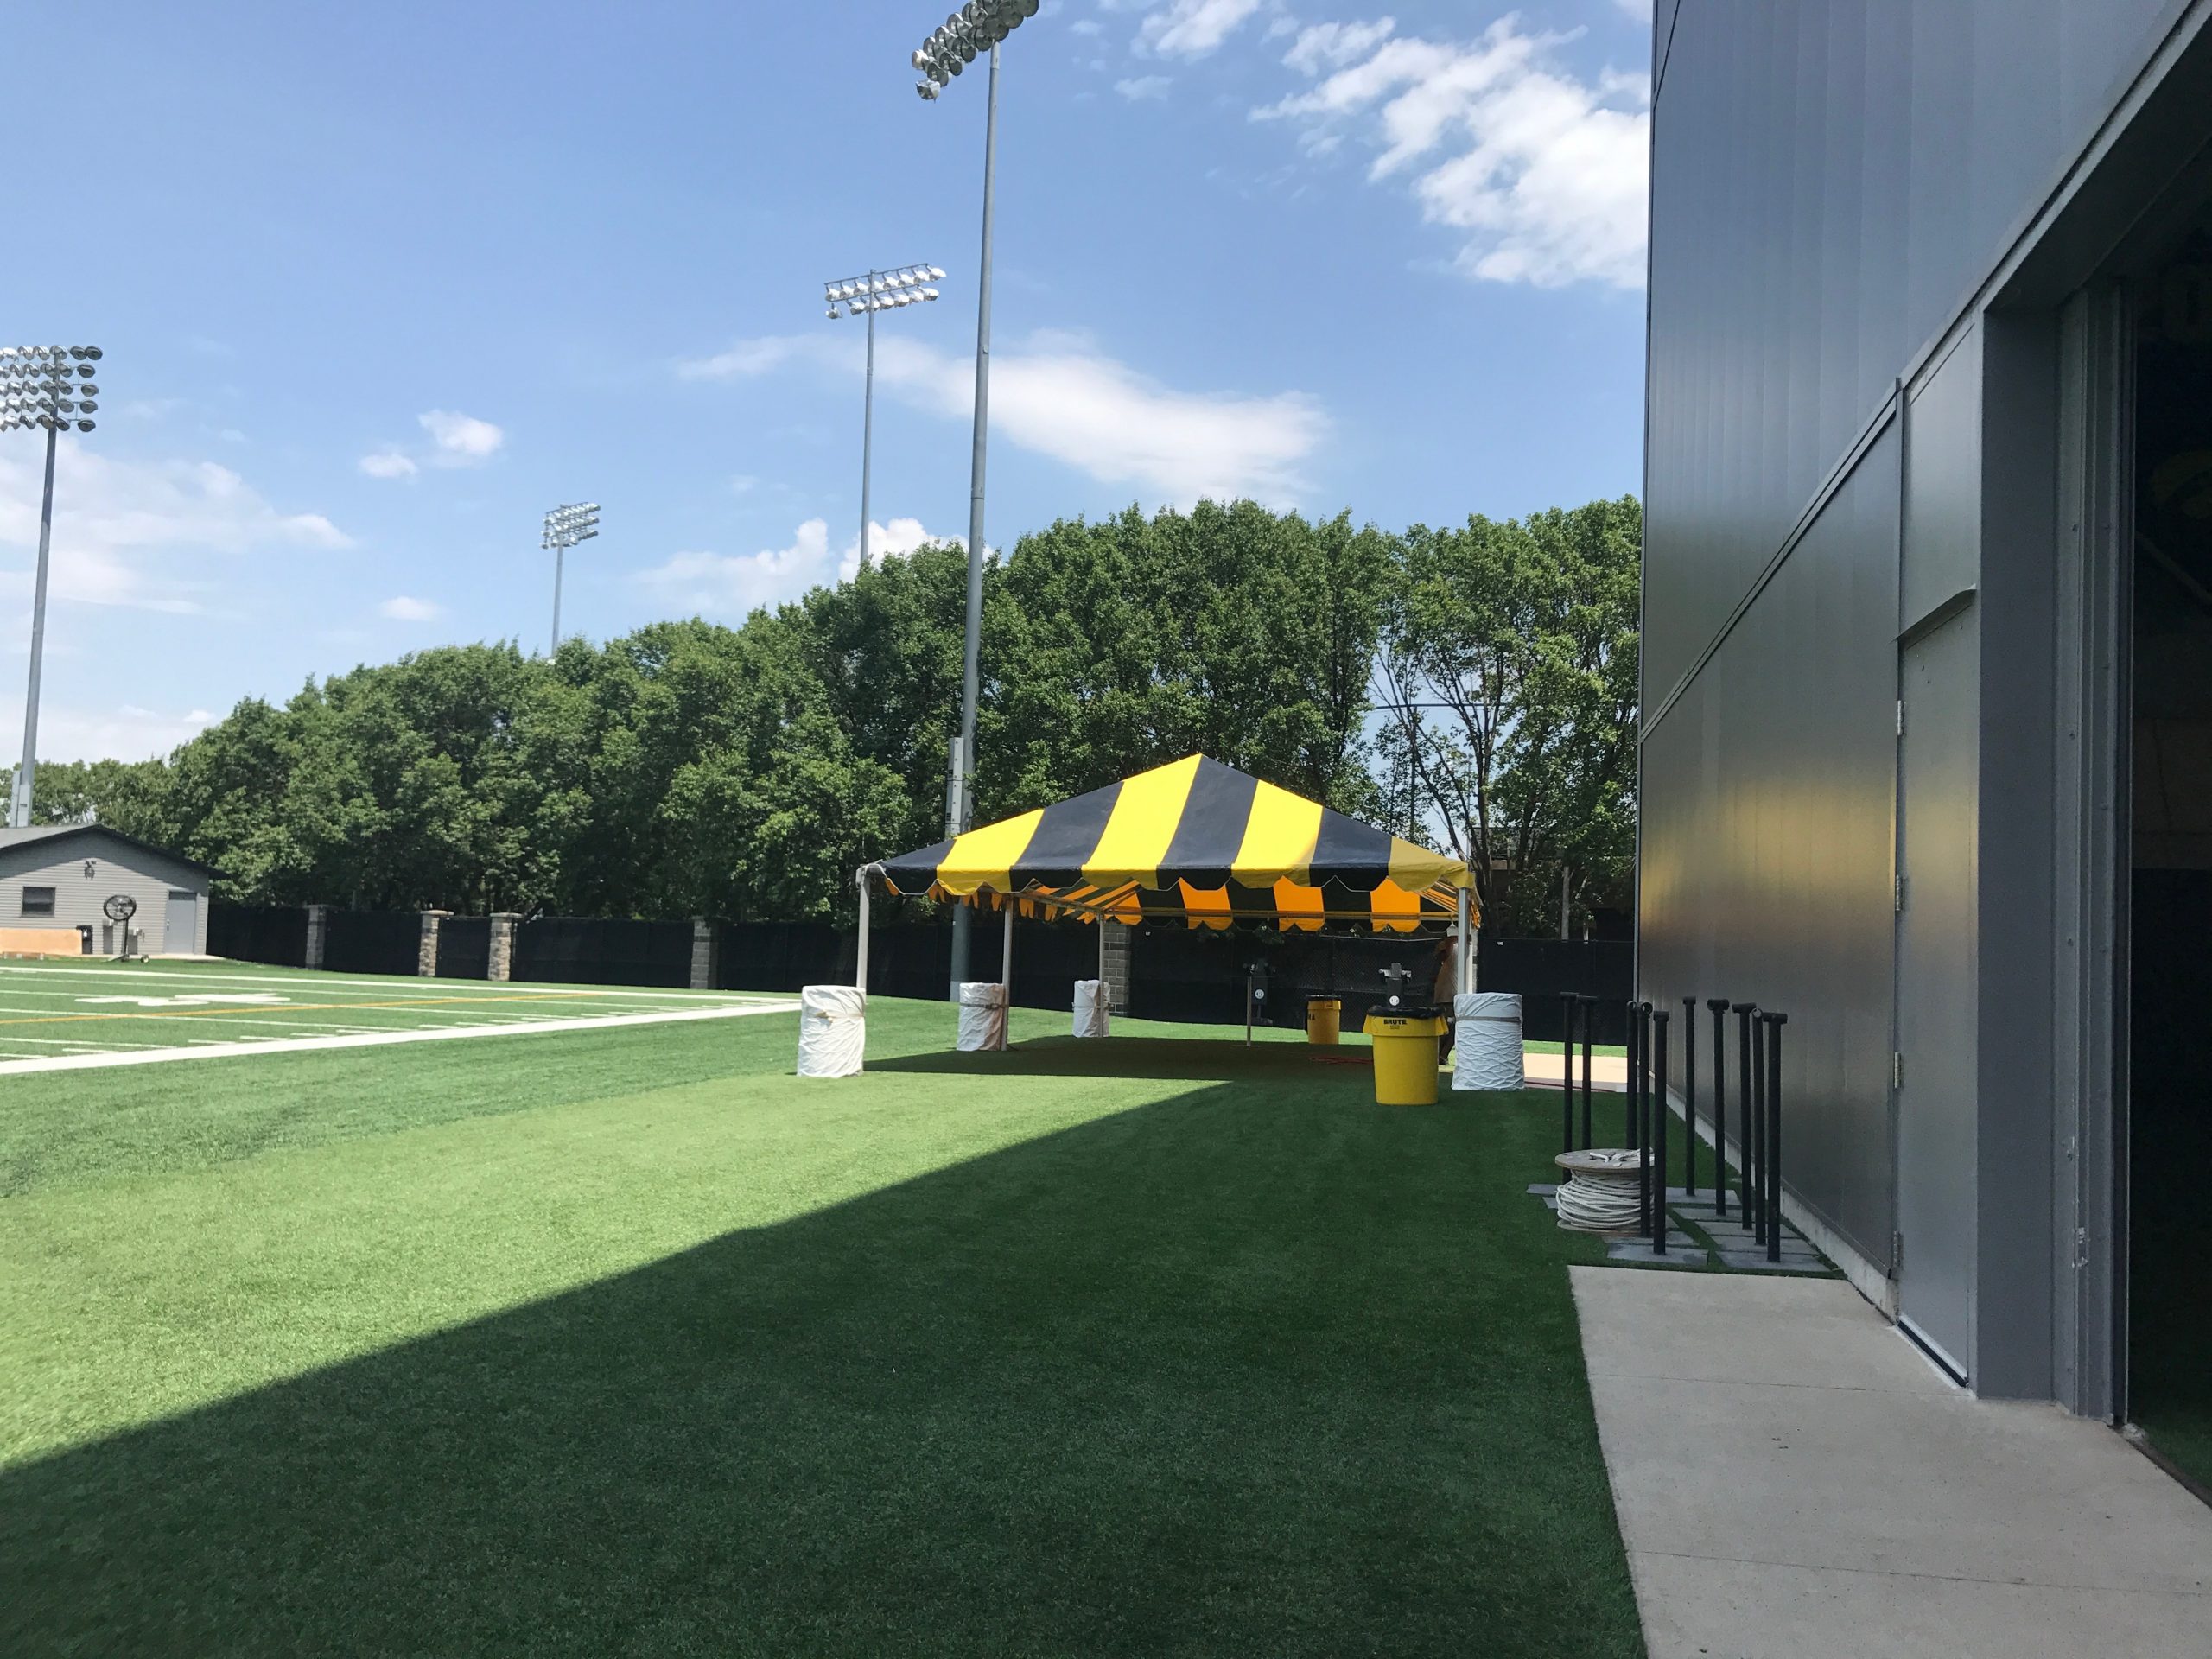 Black and Gold tent for the Ladies Football Academy at the University of Iowa by the football training field